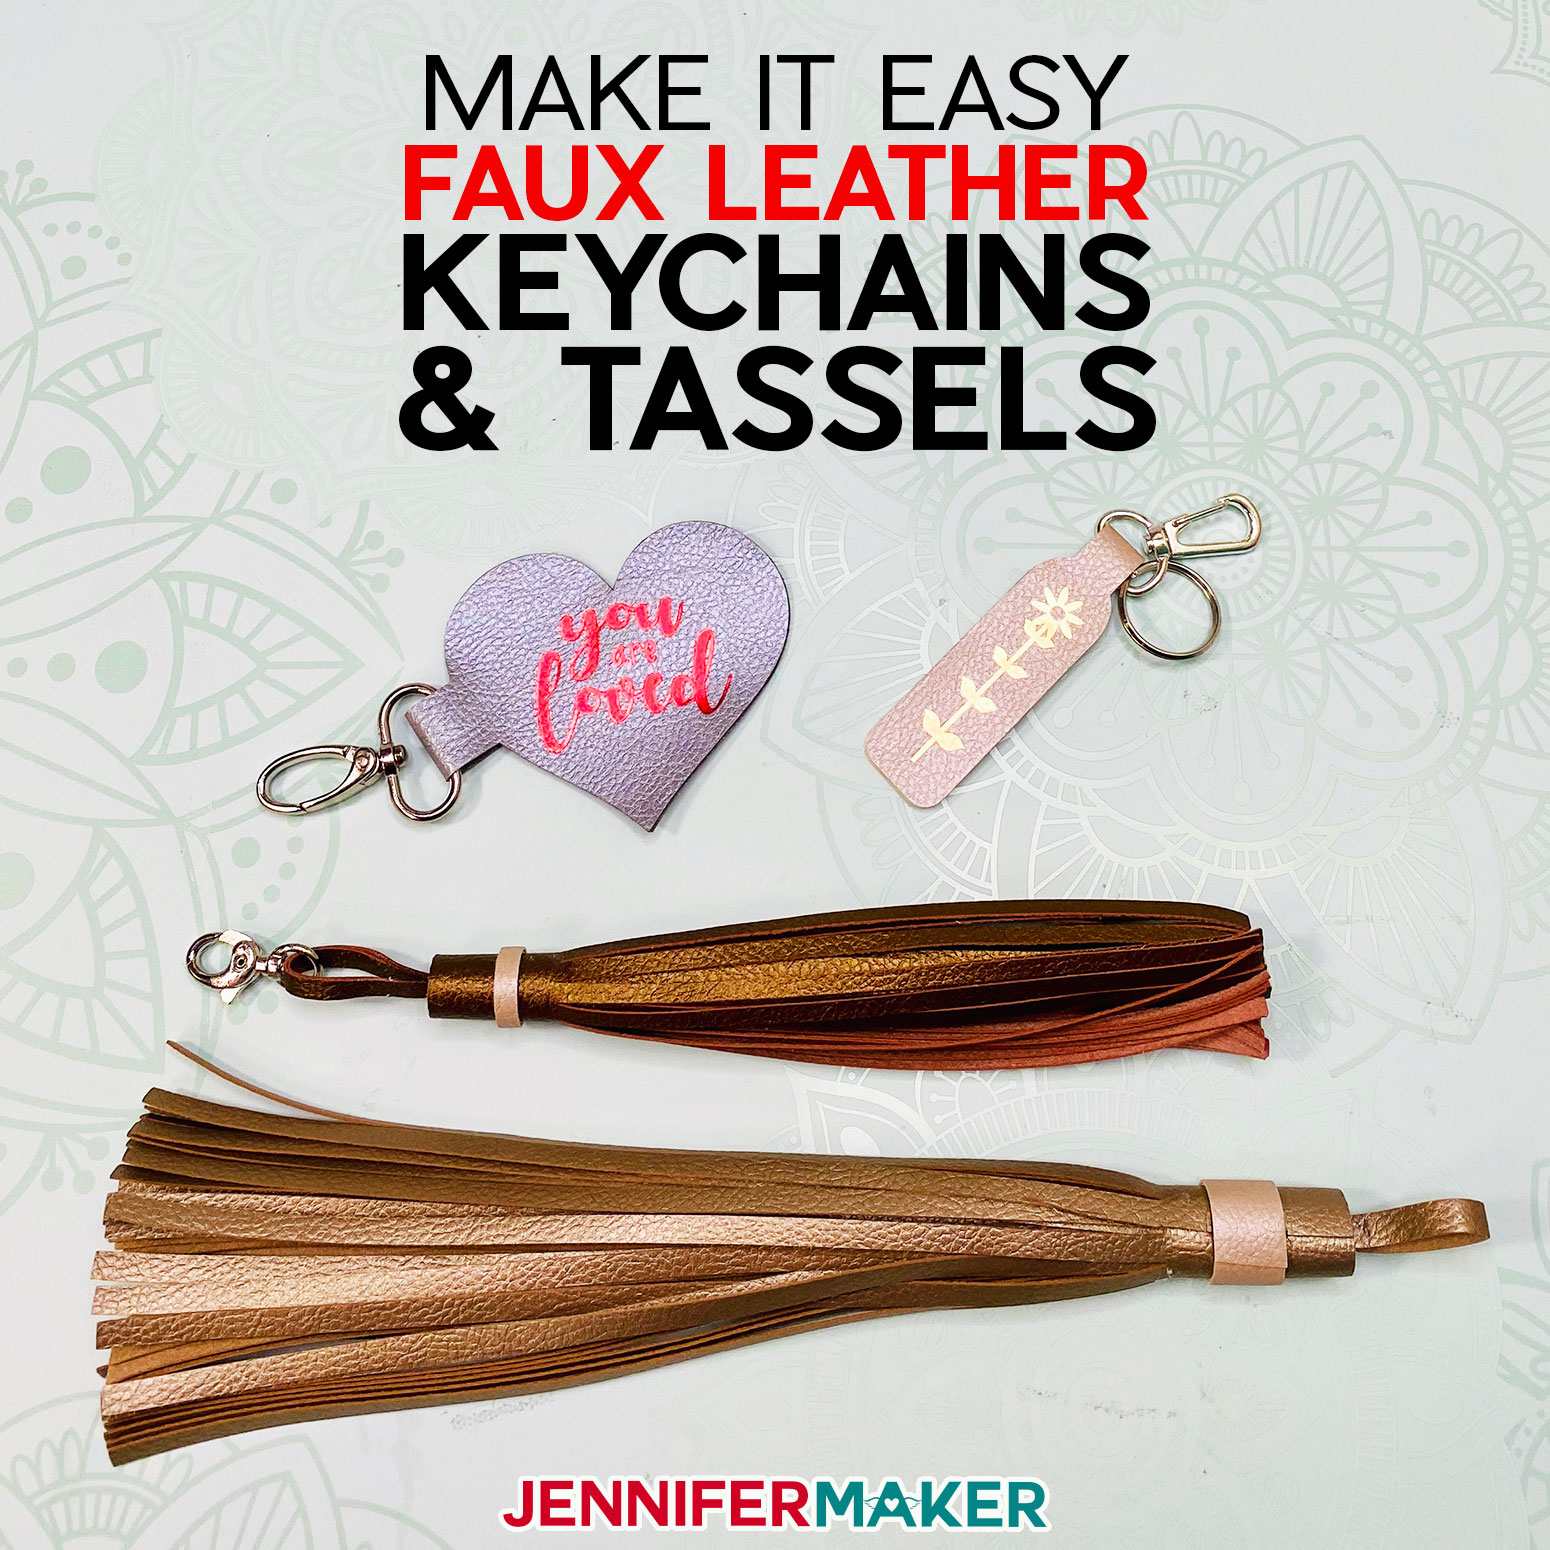 Easy Keychains and Tassels from Faux Leather